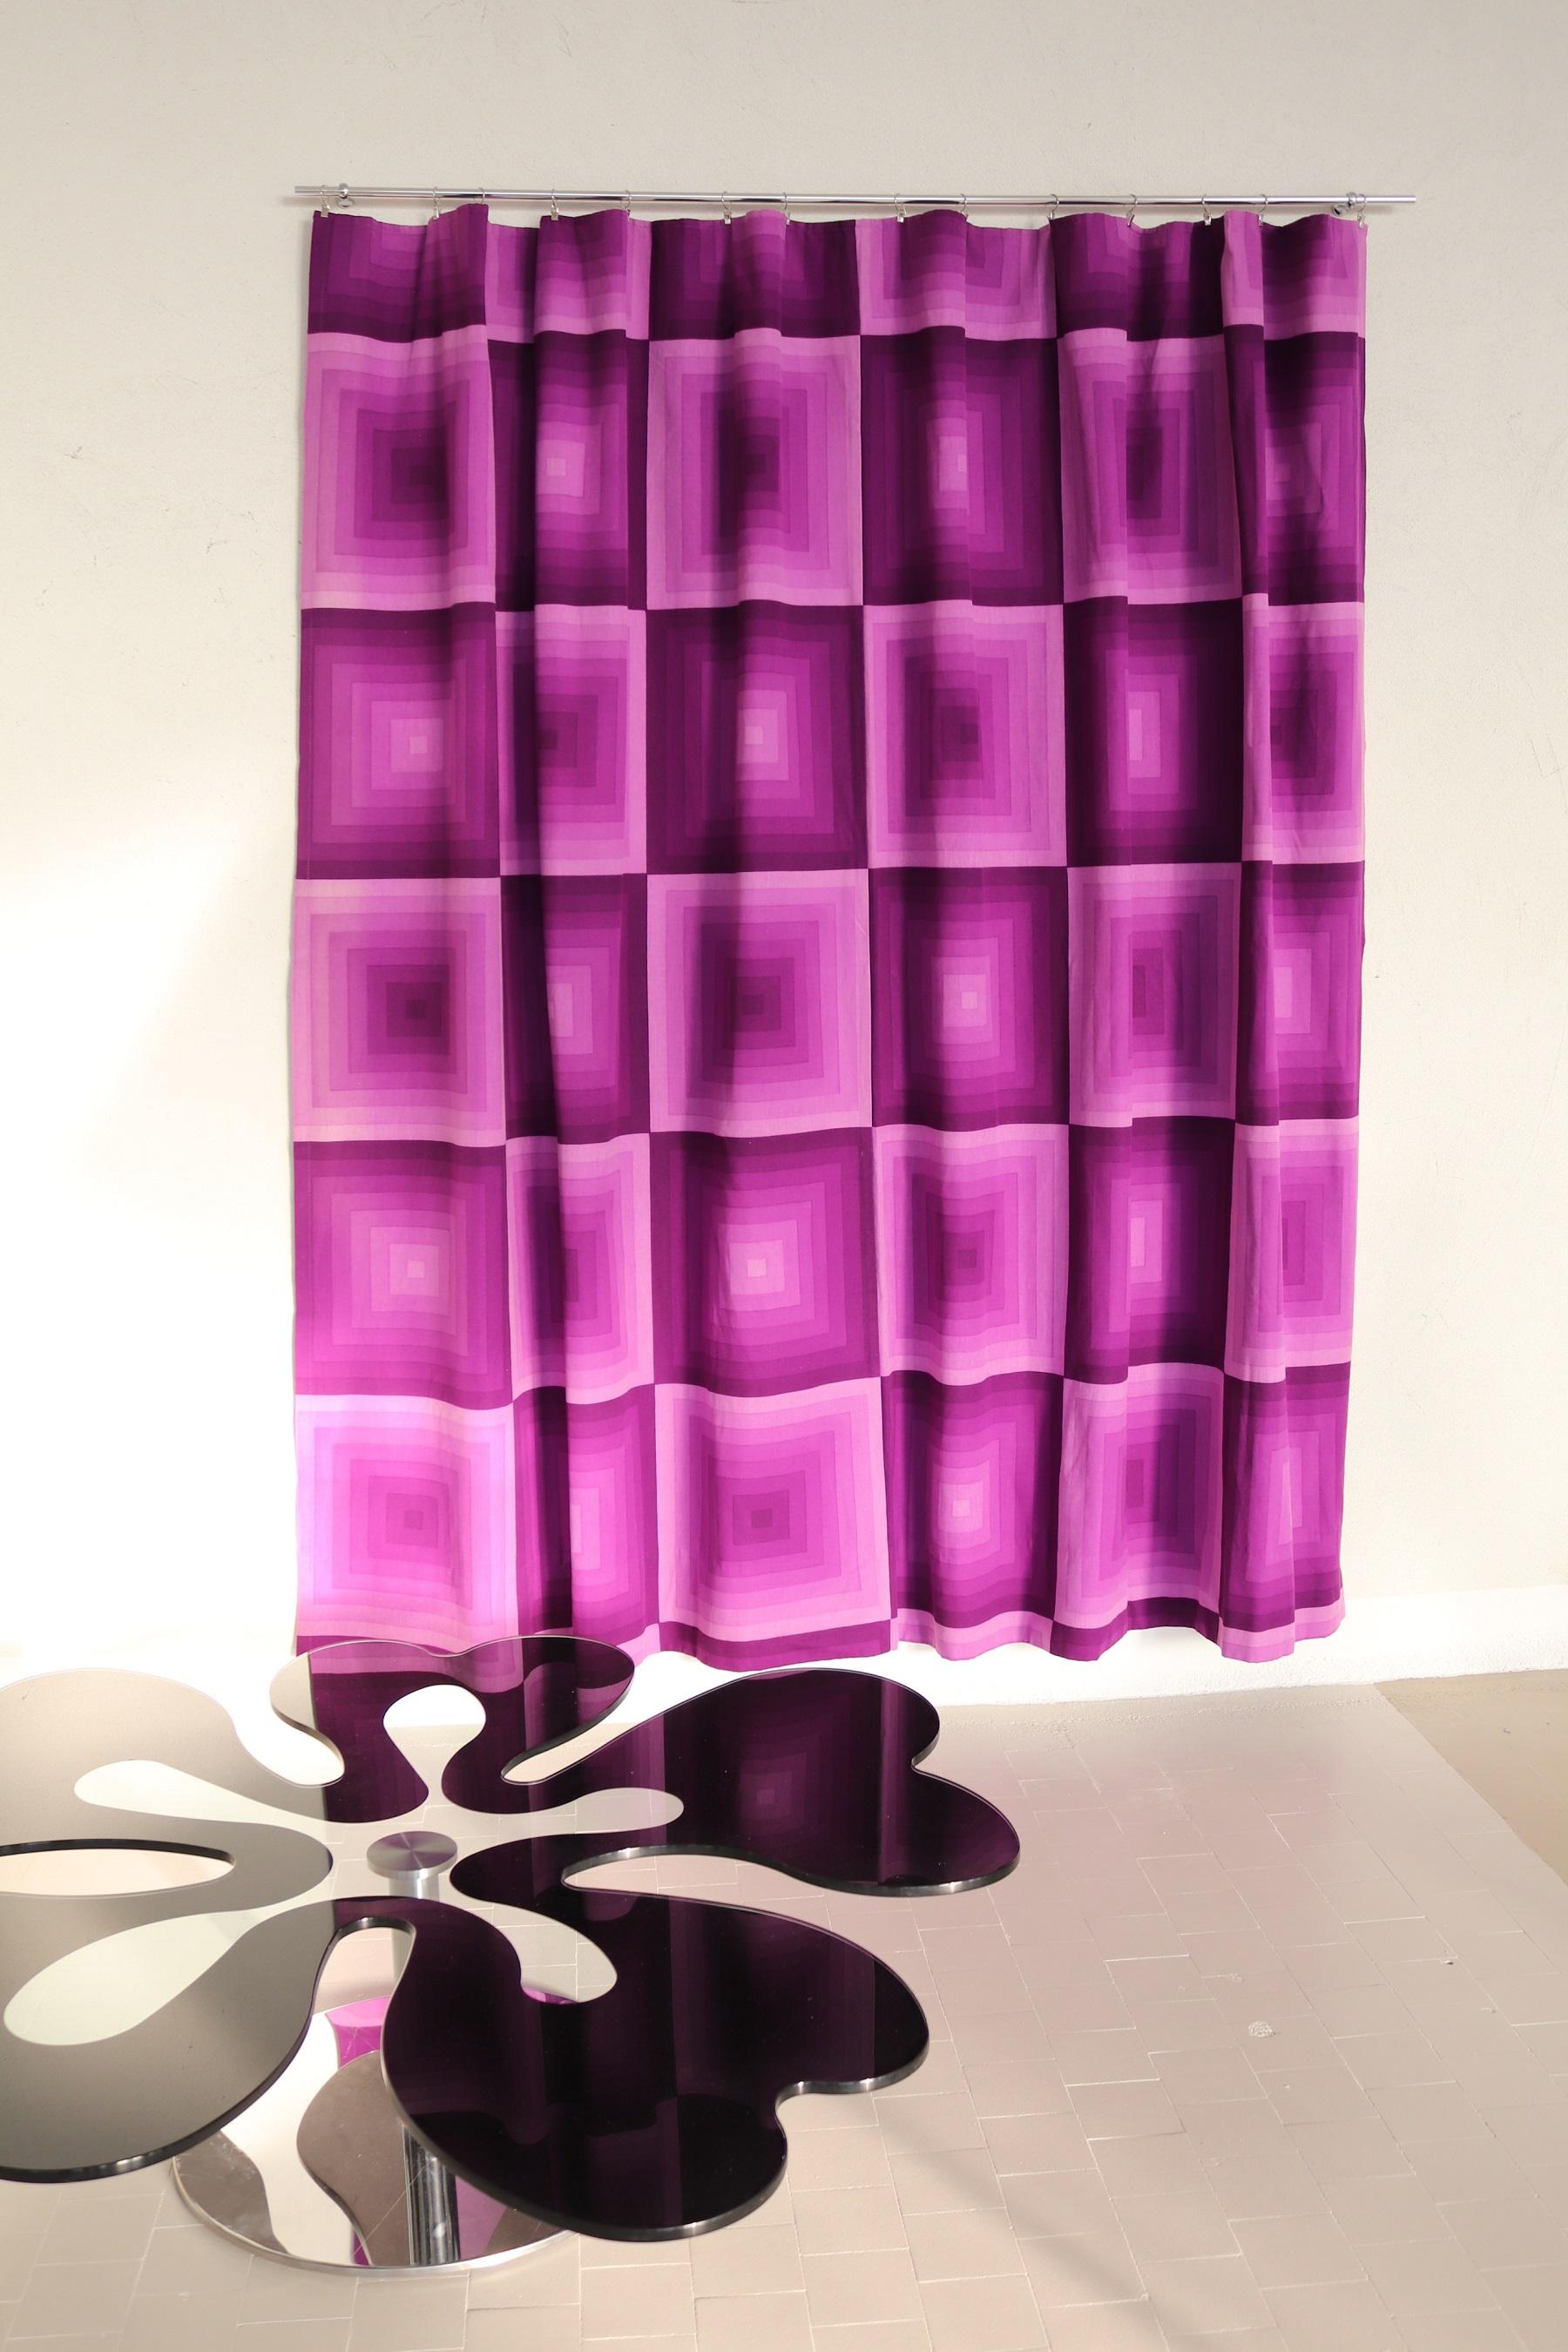 Powerful original curtain panel designed by Verner Panton during 1969-1971.
100% cotton material, Mira-X Collection., Made in Switzerland. The curtain is custom made directly from the manufacturer.
Two panels available separately.
Each of both